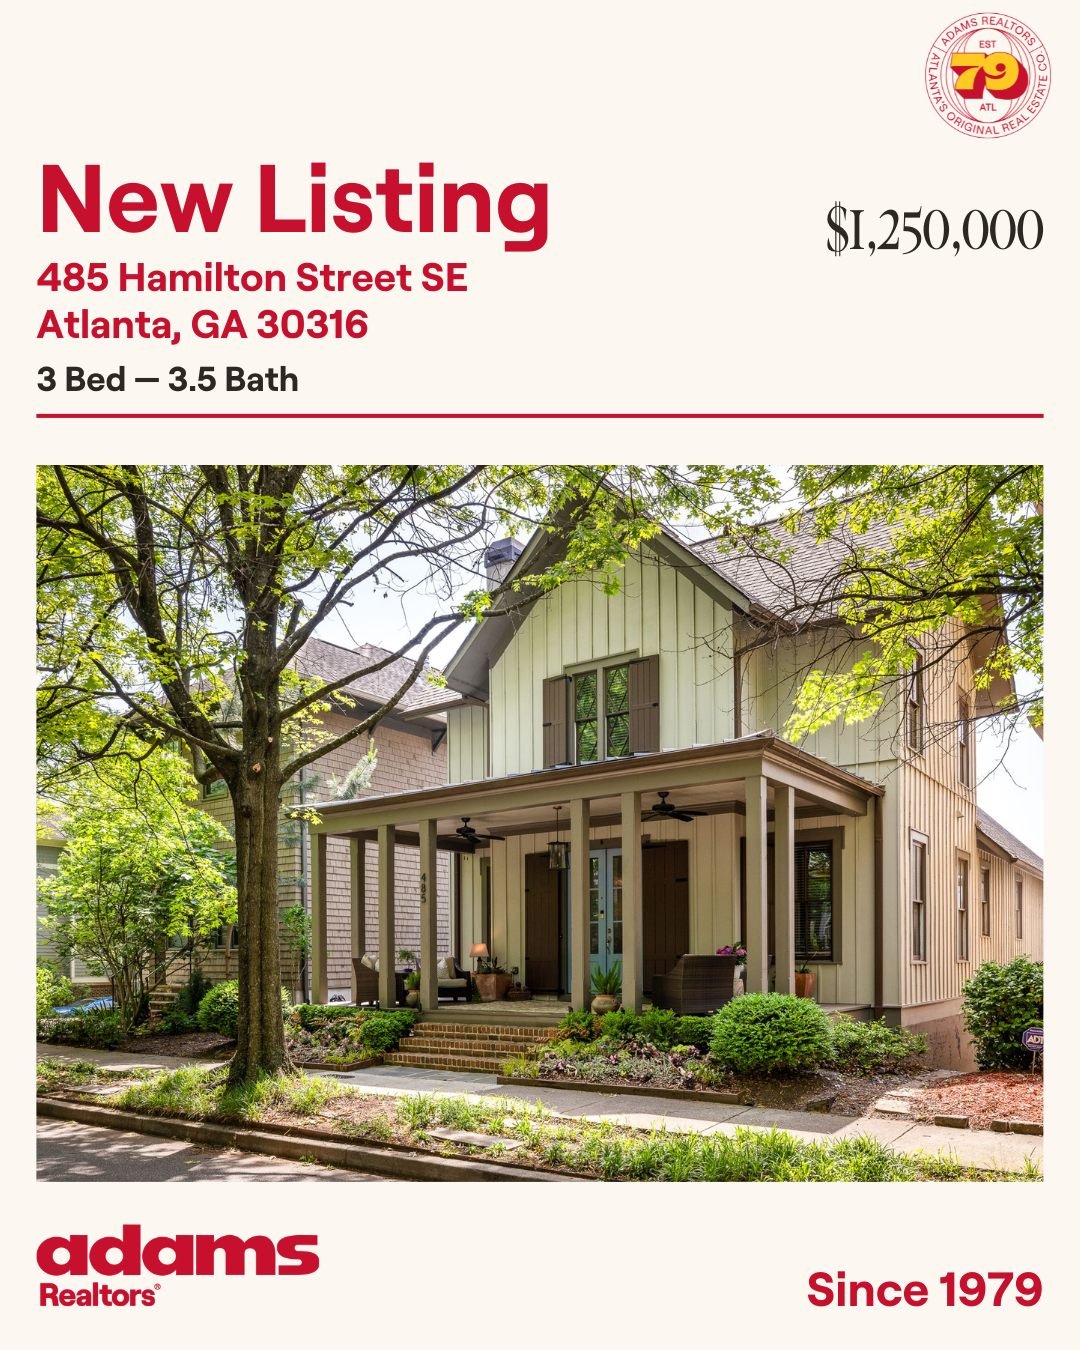 New Listing in Glenwood Park! 485 Hamilton St 3 BR | 3.5 BA $1,250,000

Located near the Atlanta Beltline, this lovely Earthcraft home in desirable Glenwood Park has hardwood floors throughout and many sophisticated upgrades. This home features an in